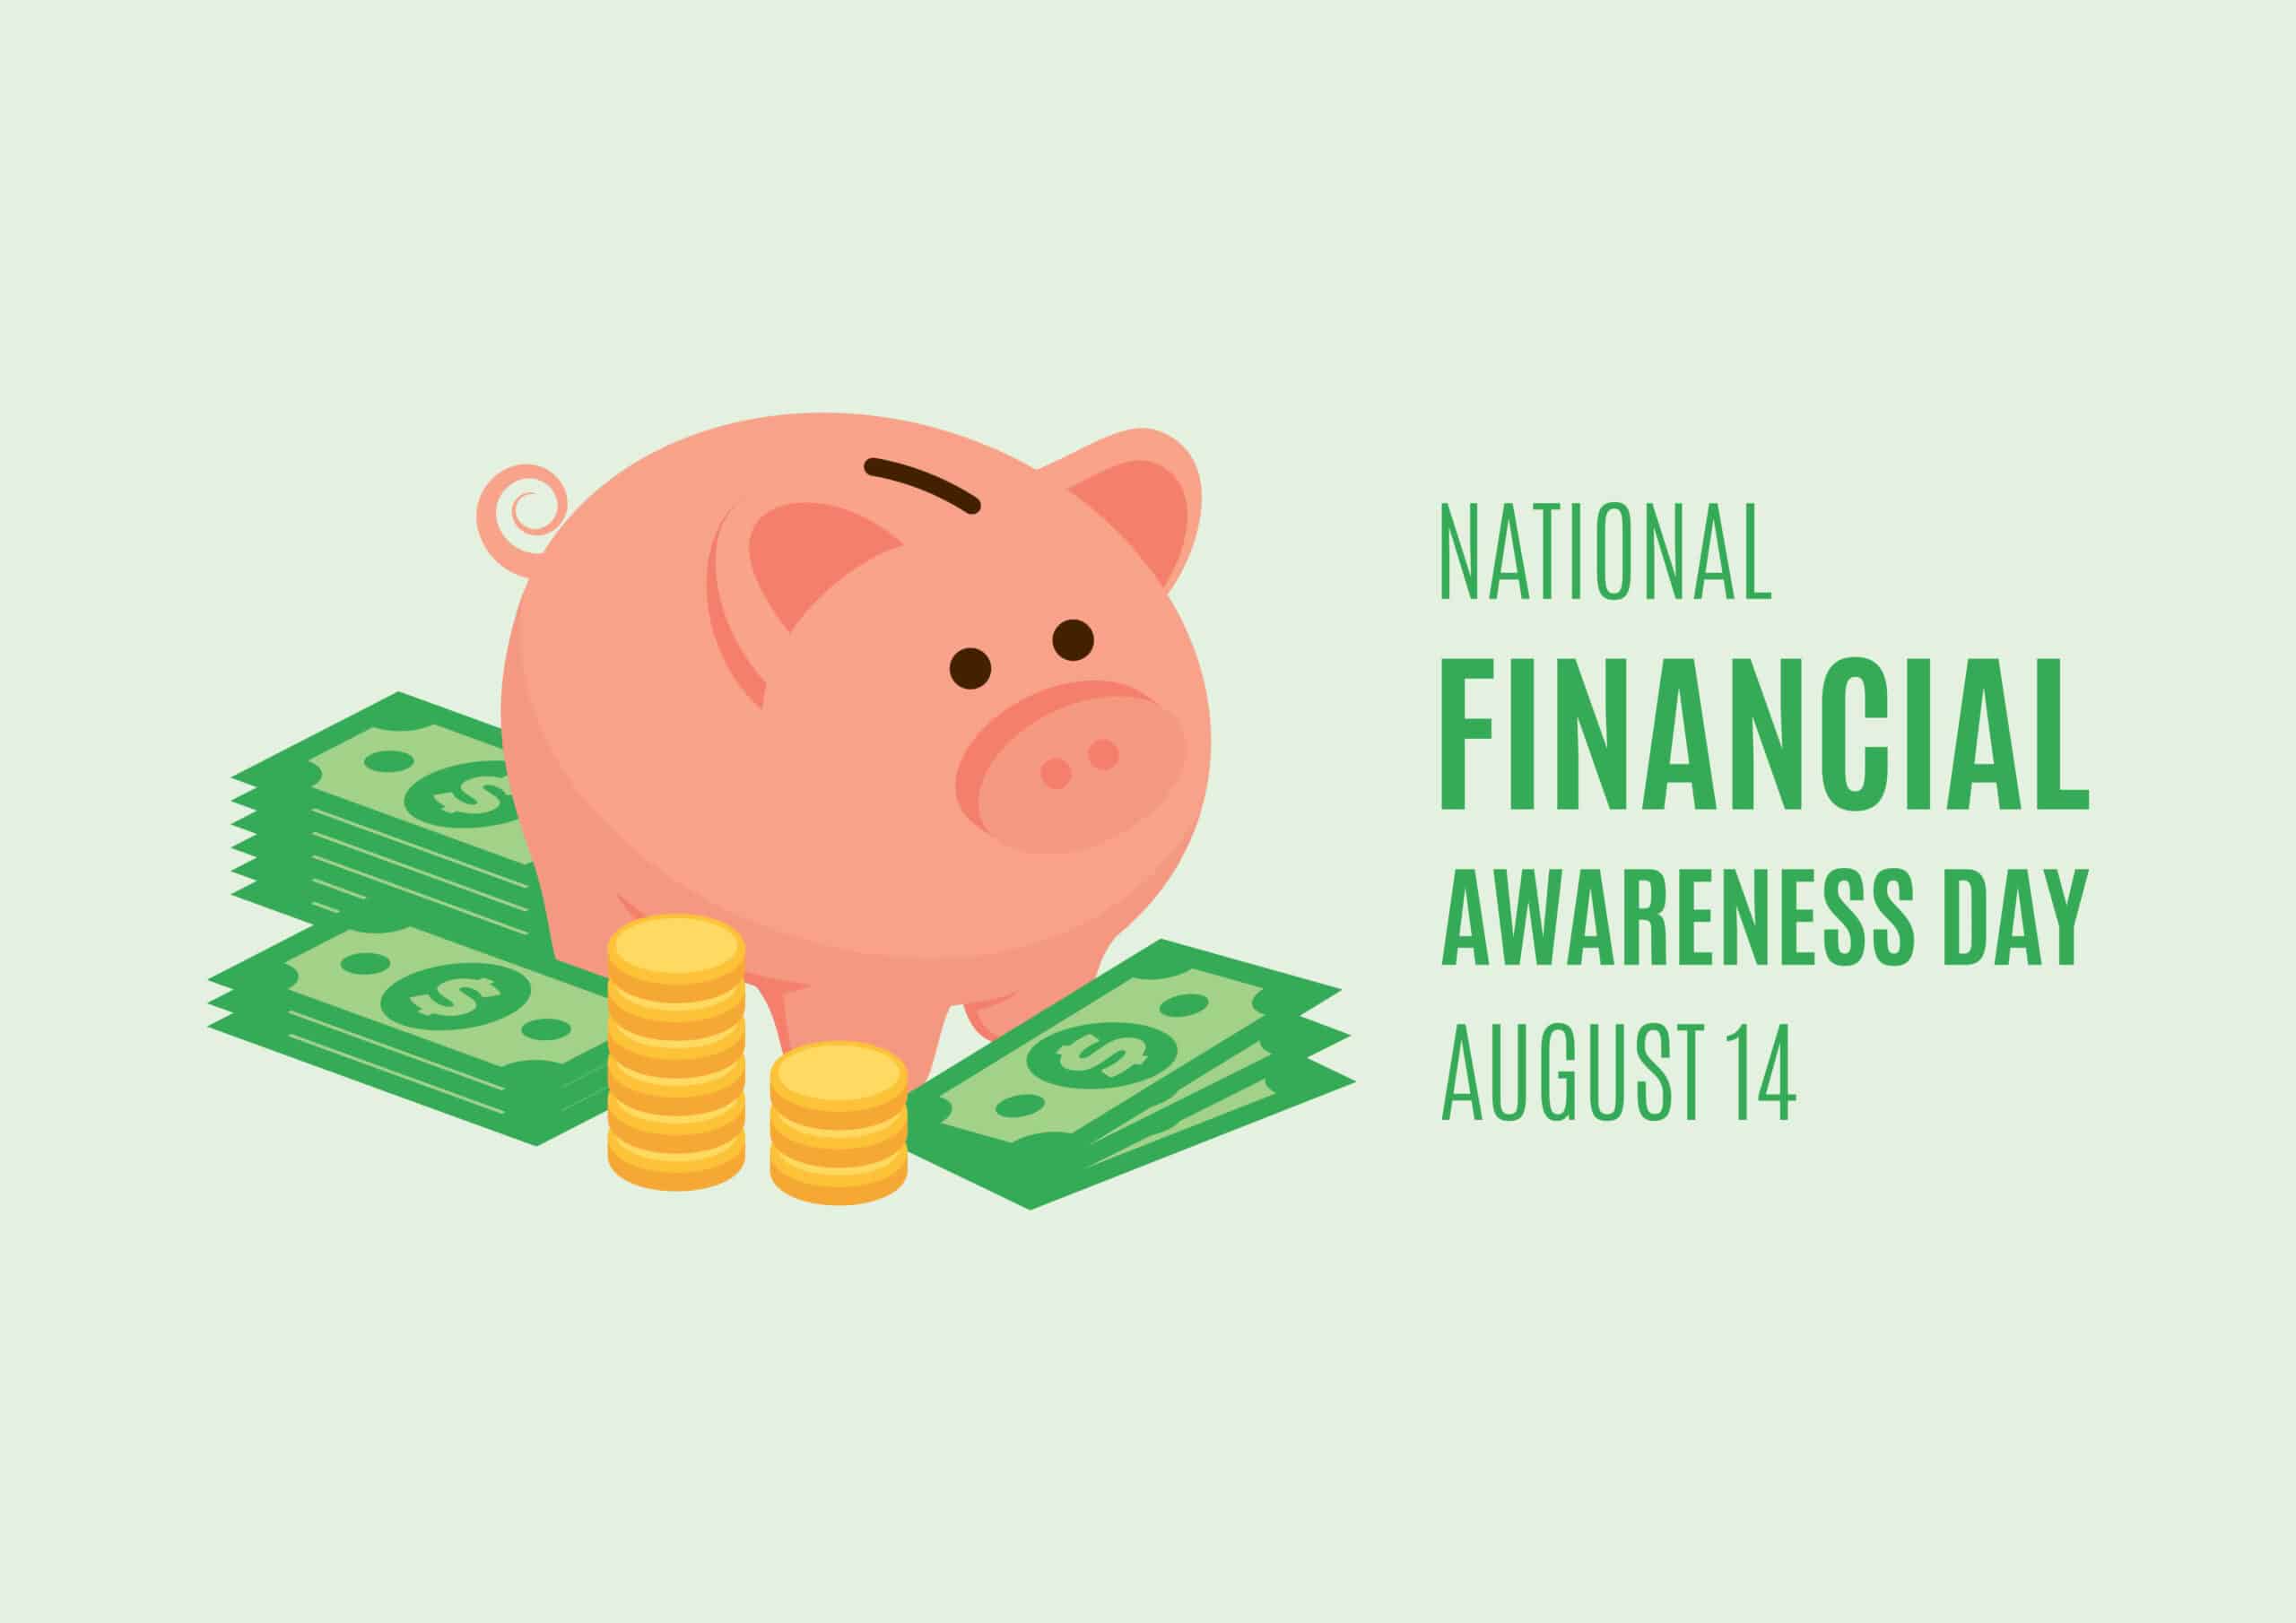 National Financial Awareness Day Logo: Promoting Financial Literacy and Money Management with Piggy Bank and Dollar Sign